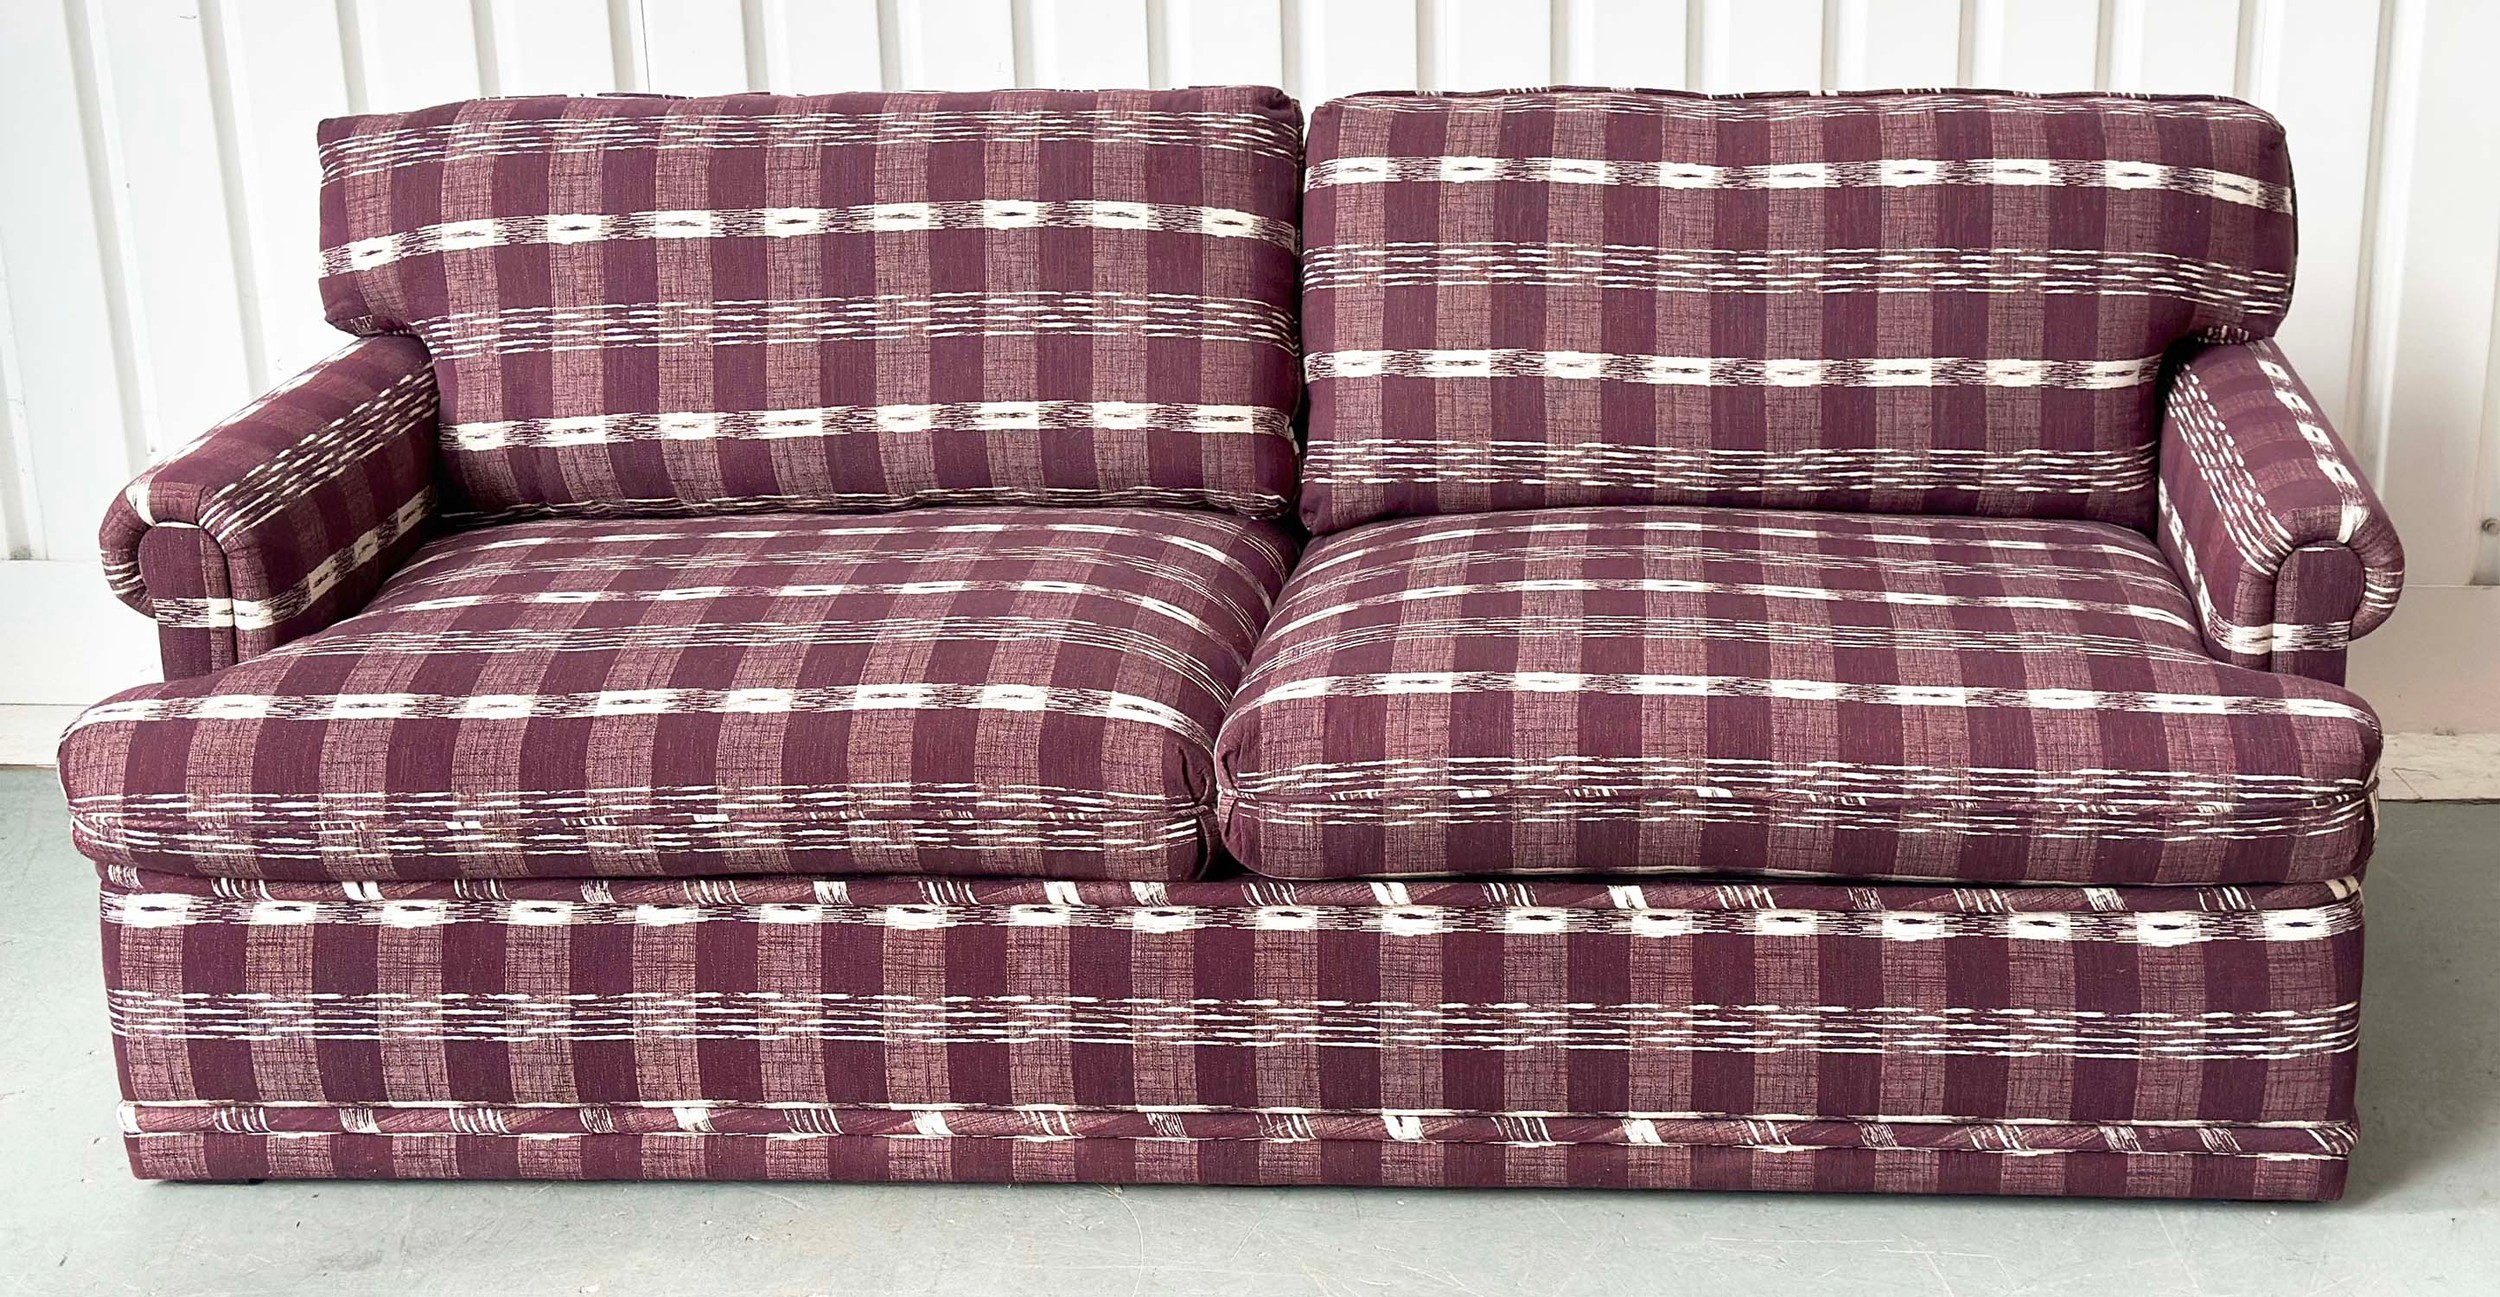 SOFA, Swedish check purple/white upholstery with scroll arms, 203cm W. - Image 4 of 18